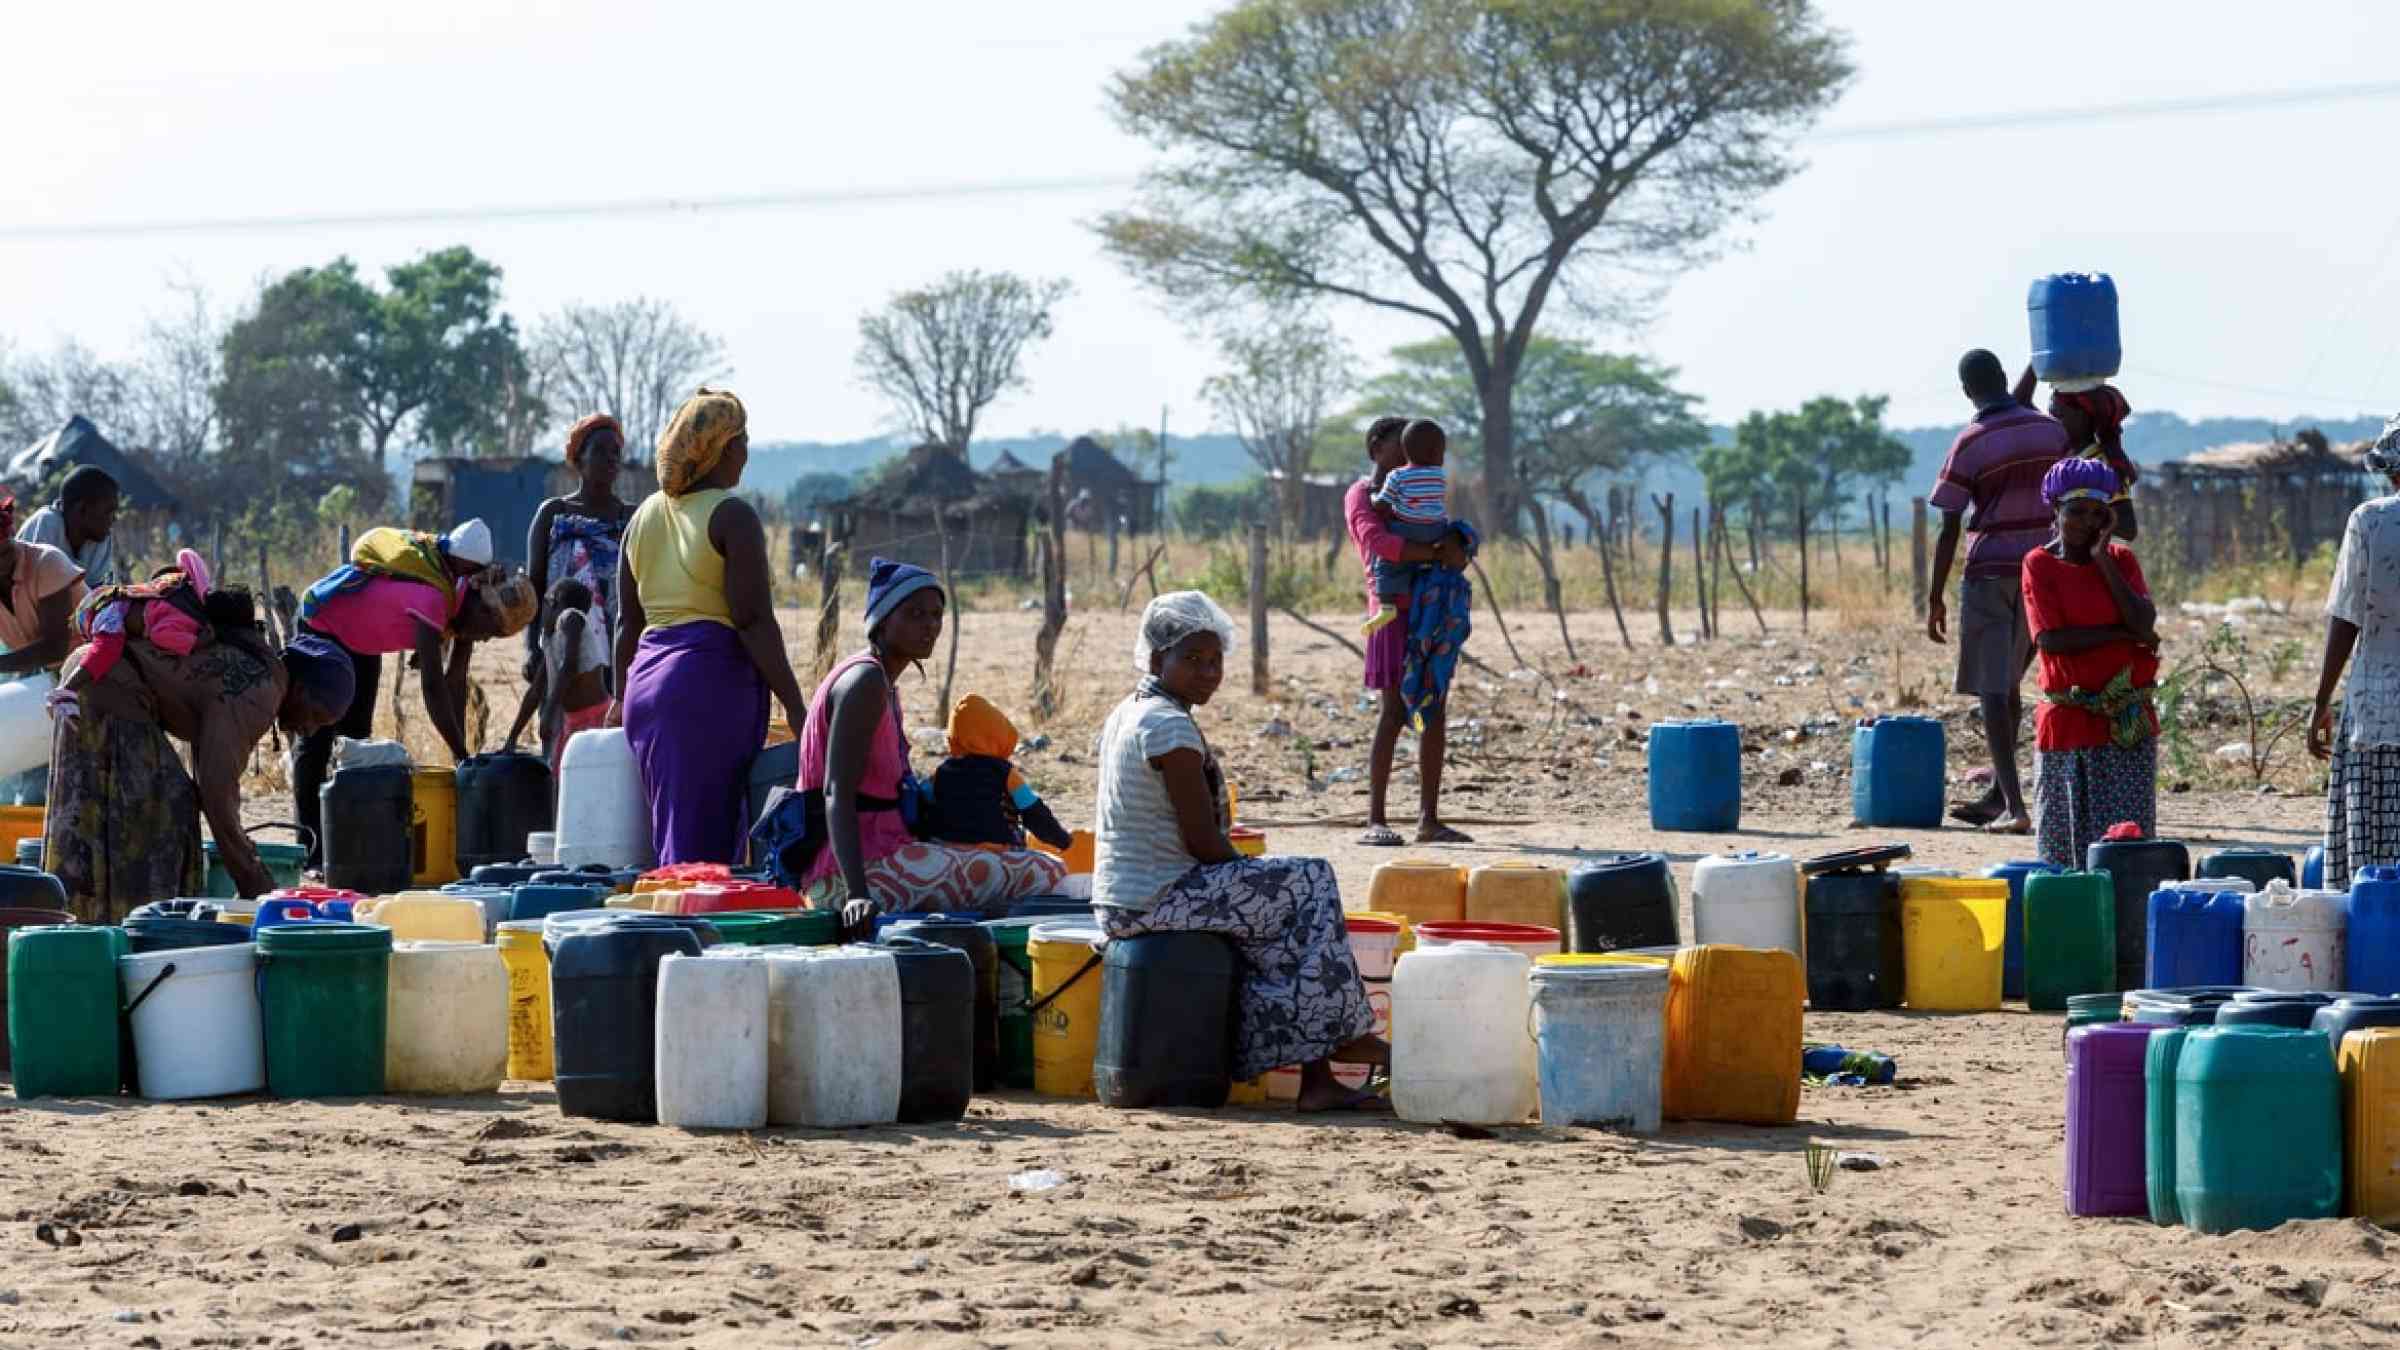  Unidentified Namibian woman with child near public tank with drinking water, Namibia (2014)